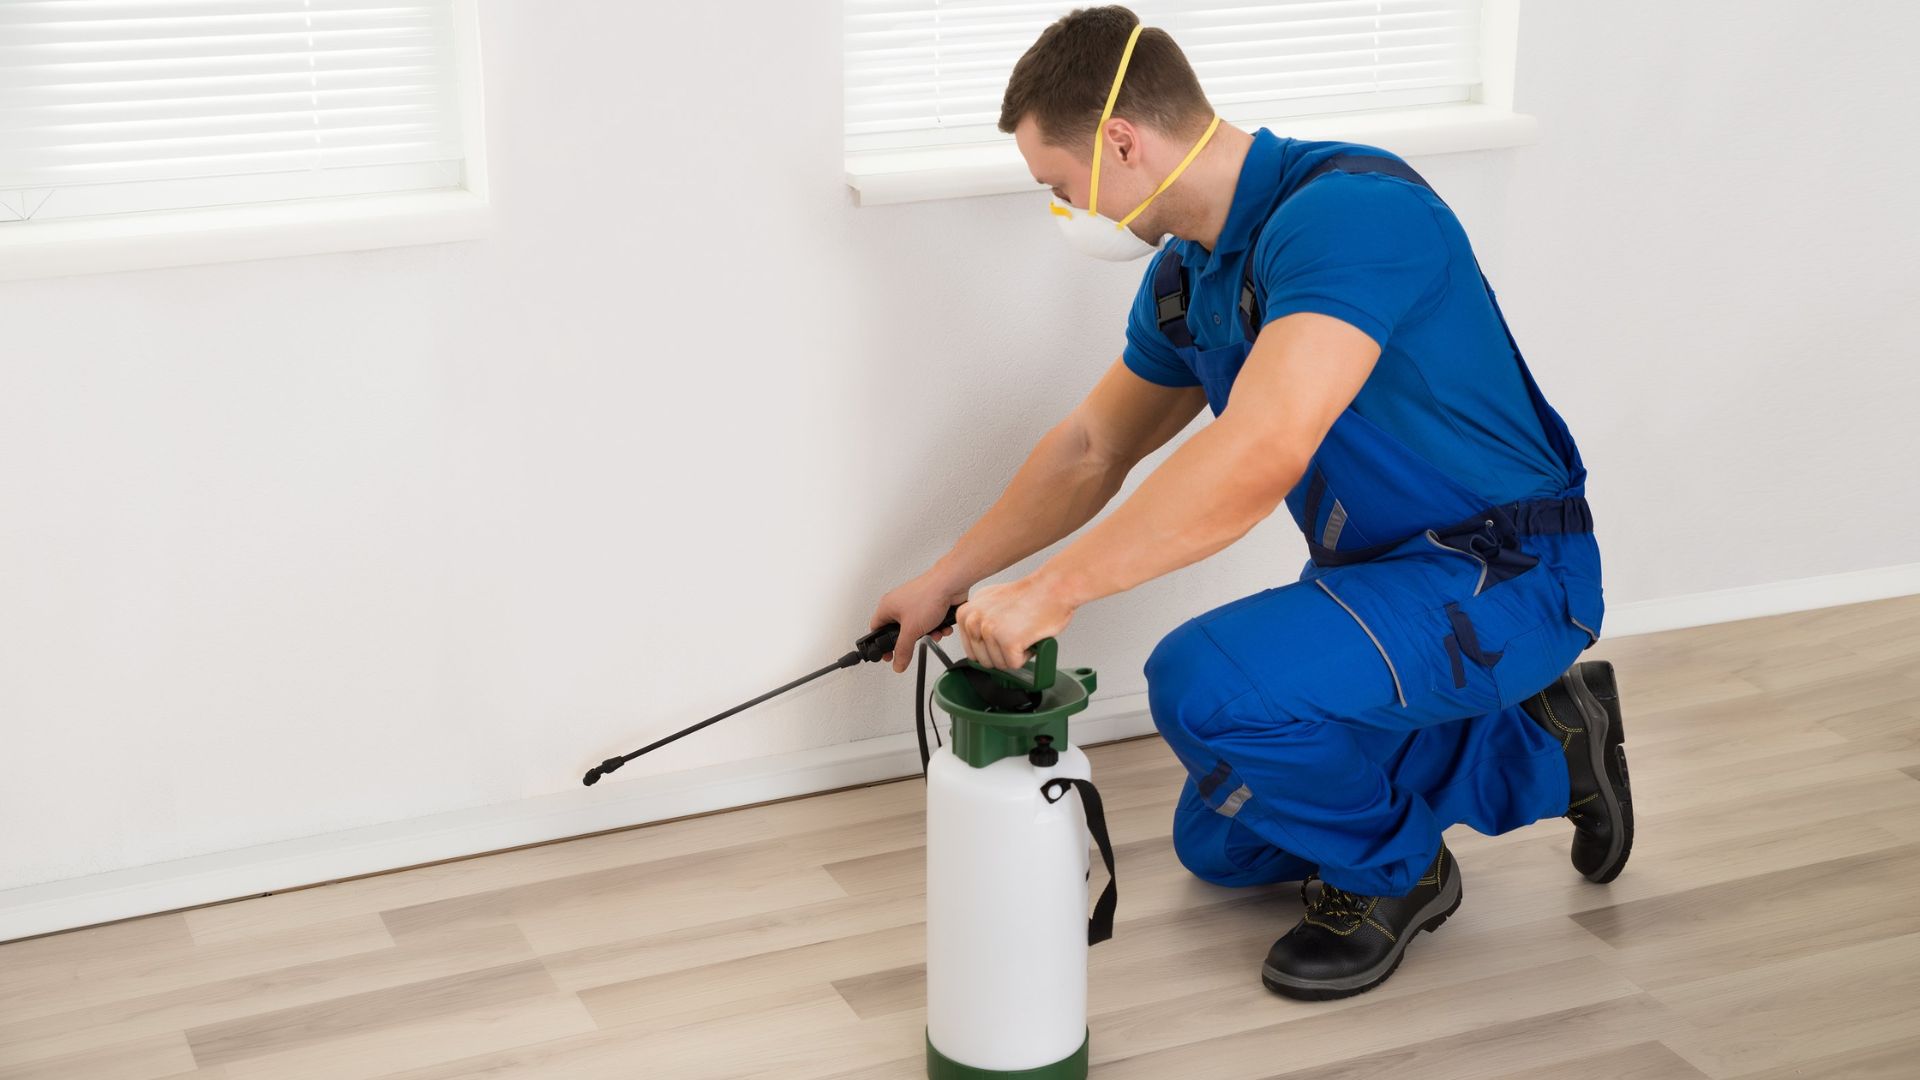 The best pest control Services provider